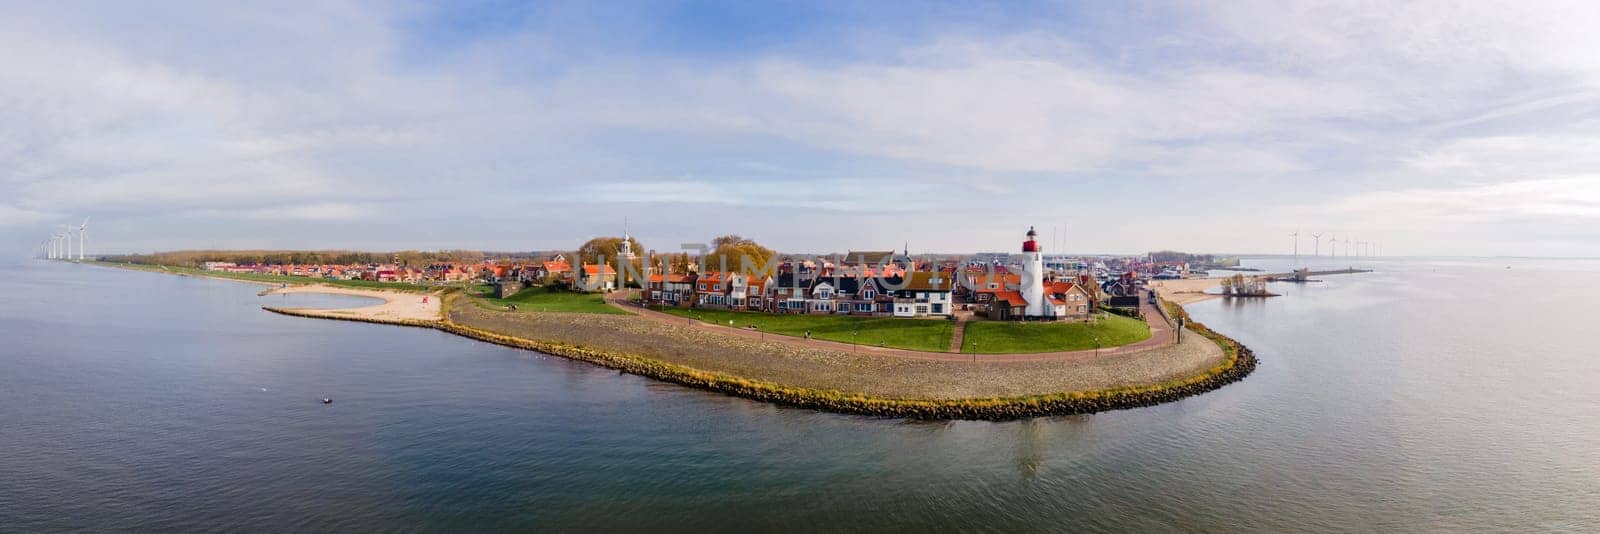 panoramic view at the Lighthouse of Urk Netherlands during sunset in the Netherlands.